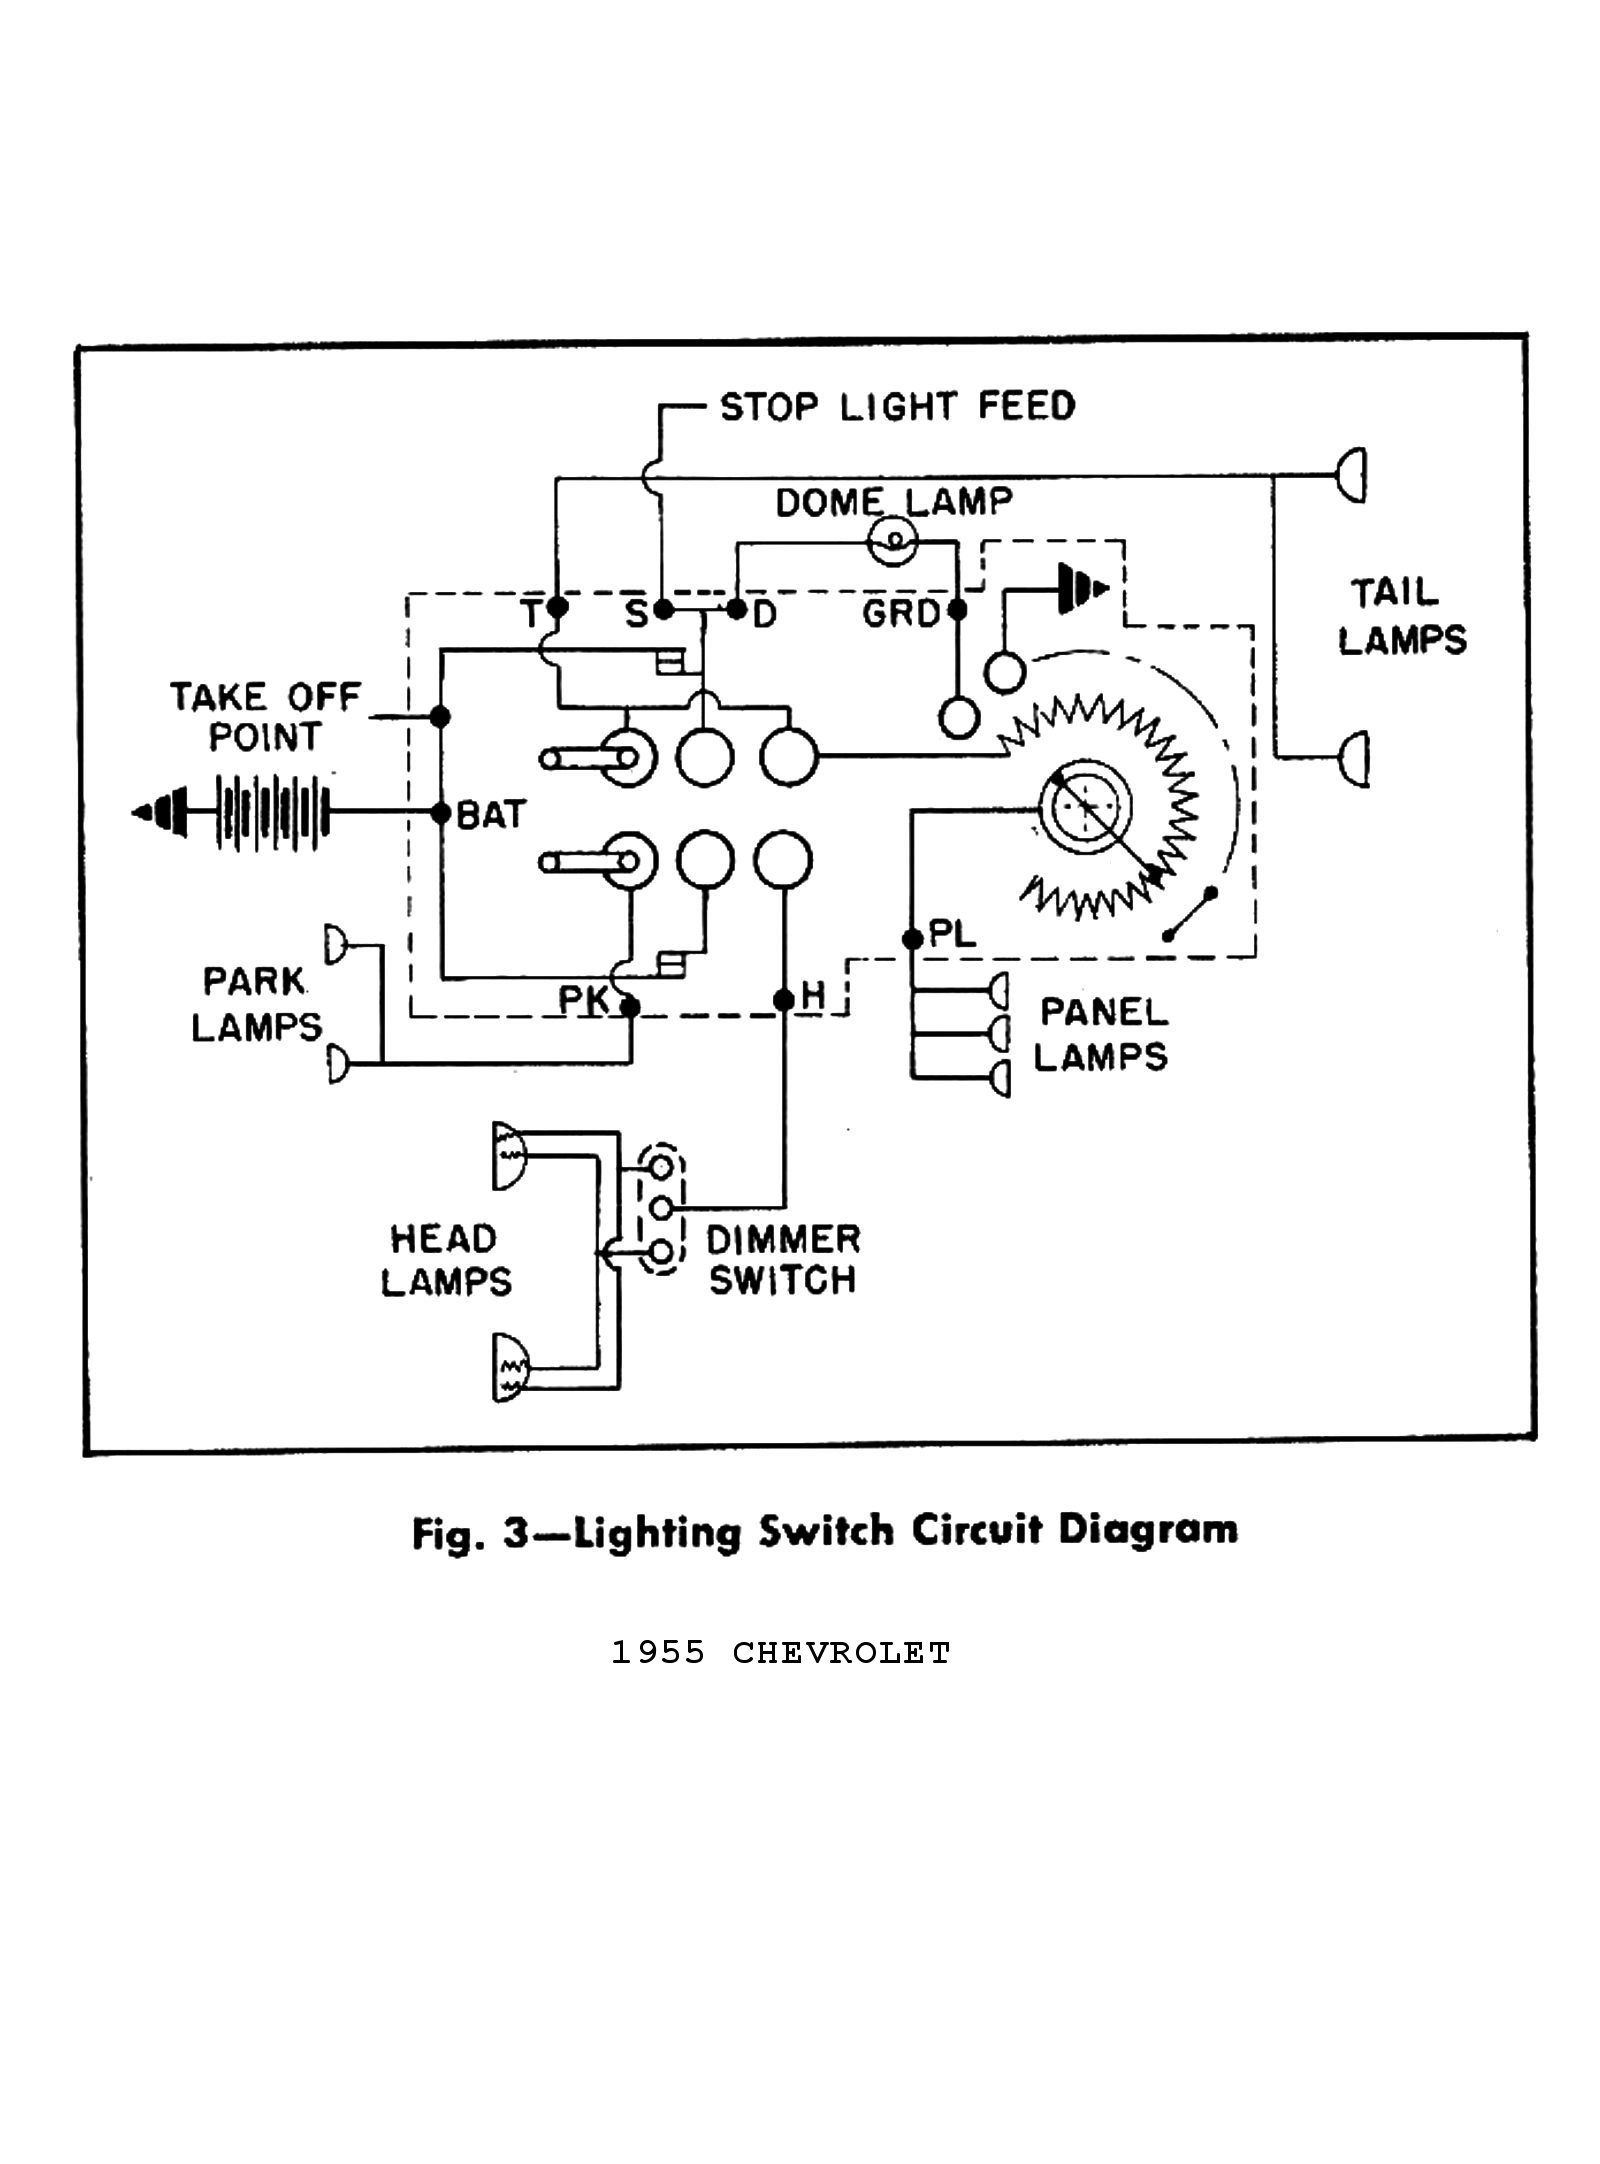 Leland Electric Motor Wiring Diagram from chevy.oldcarmanualproject.com